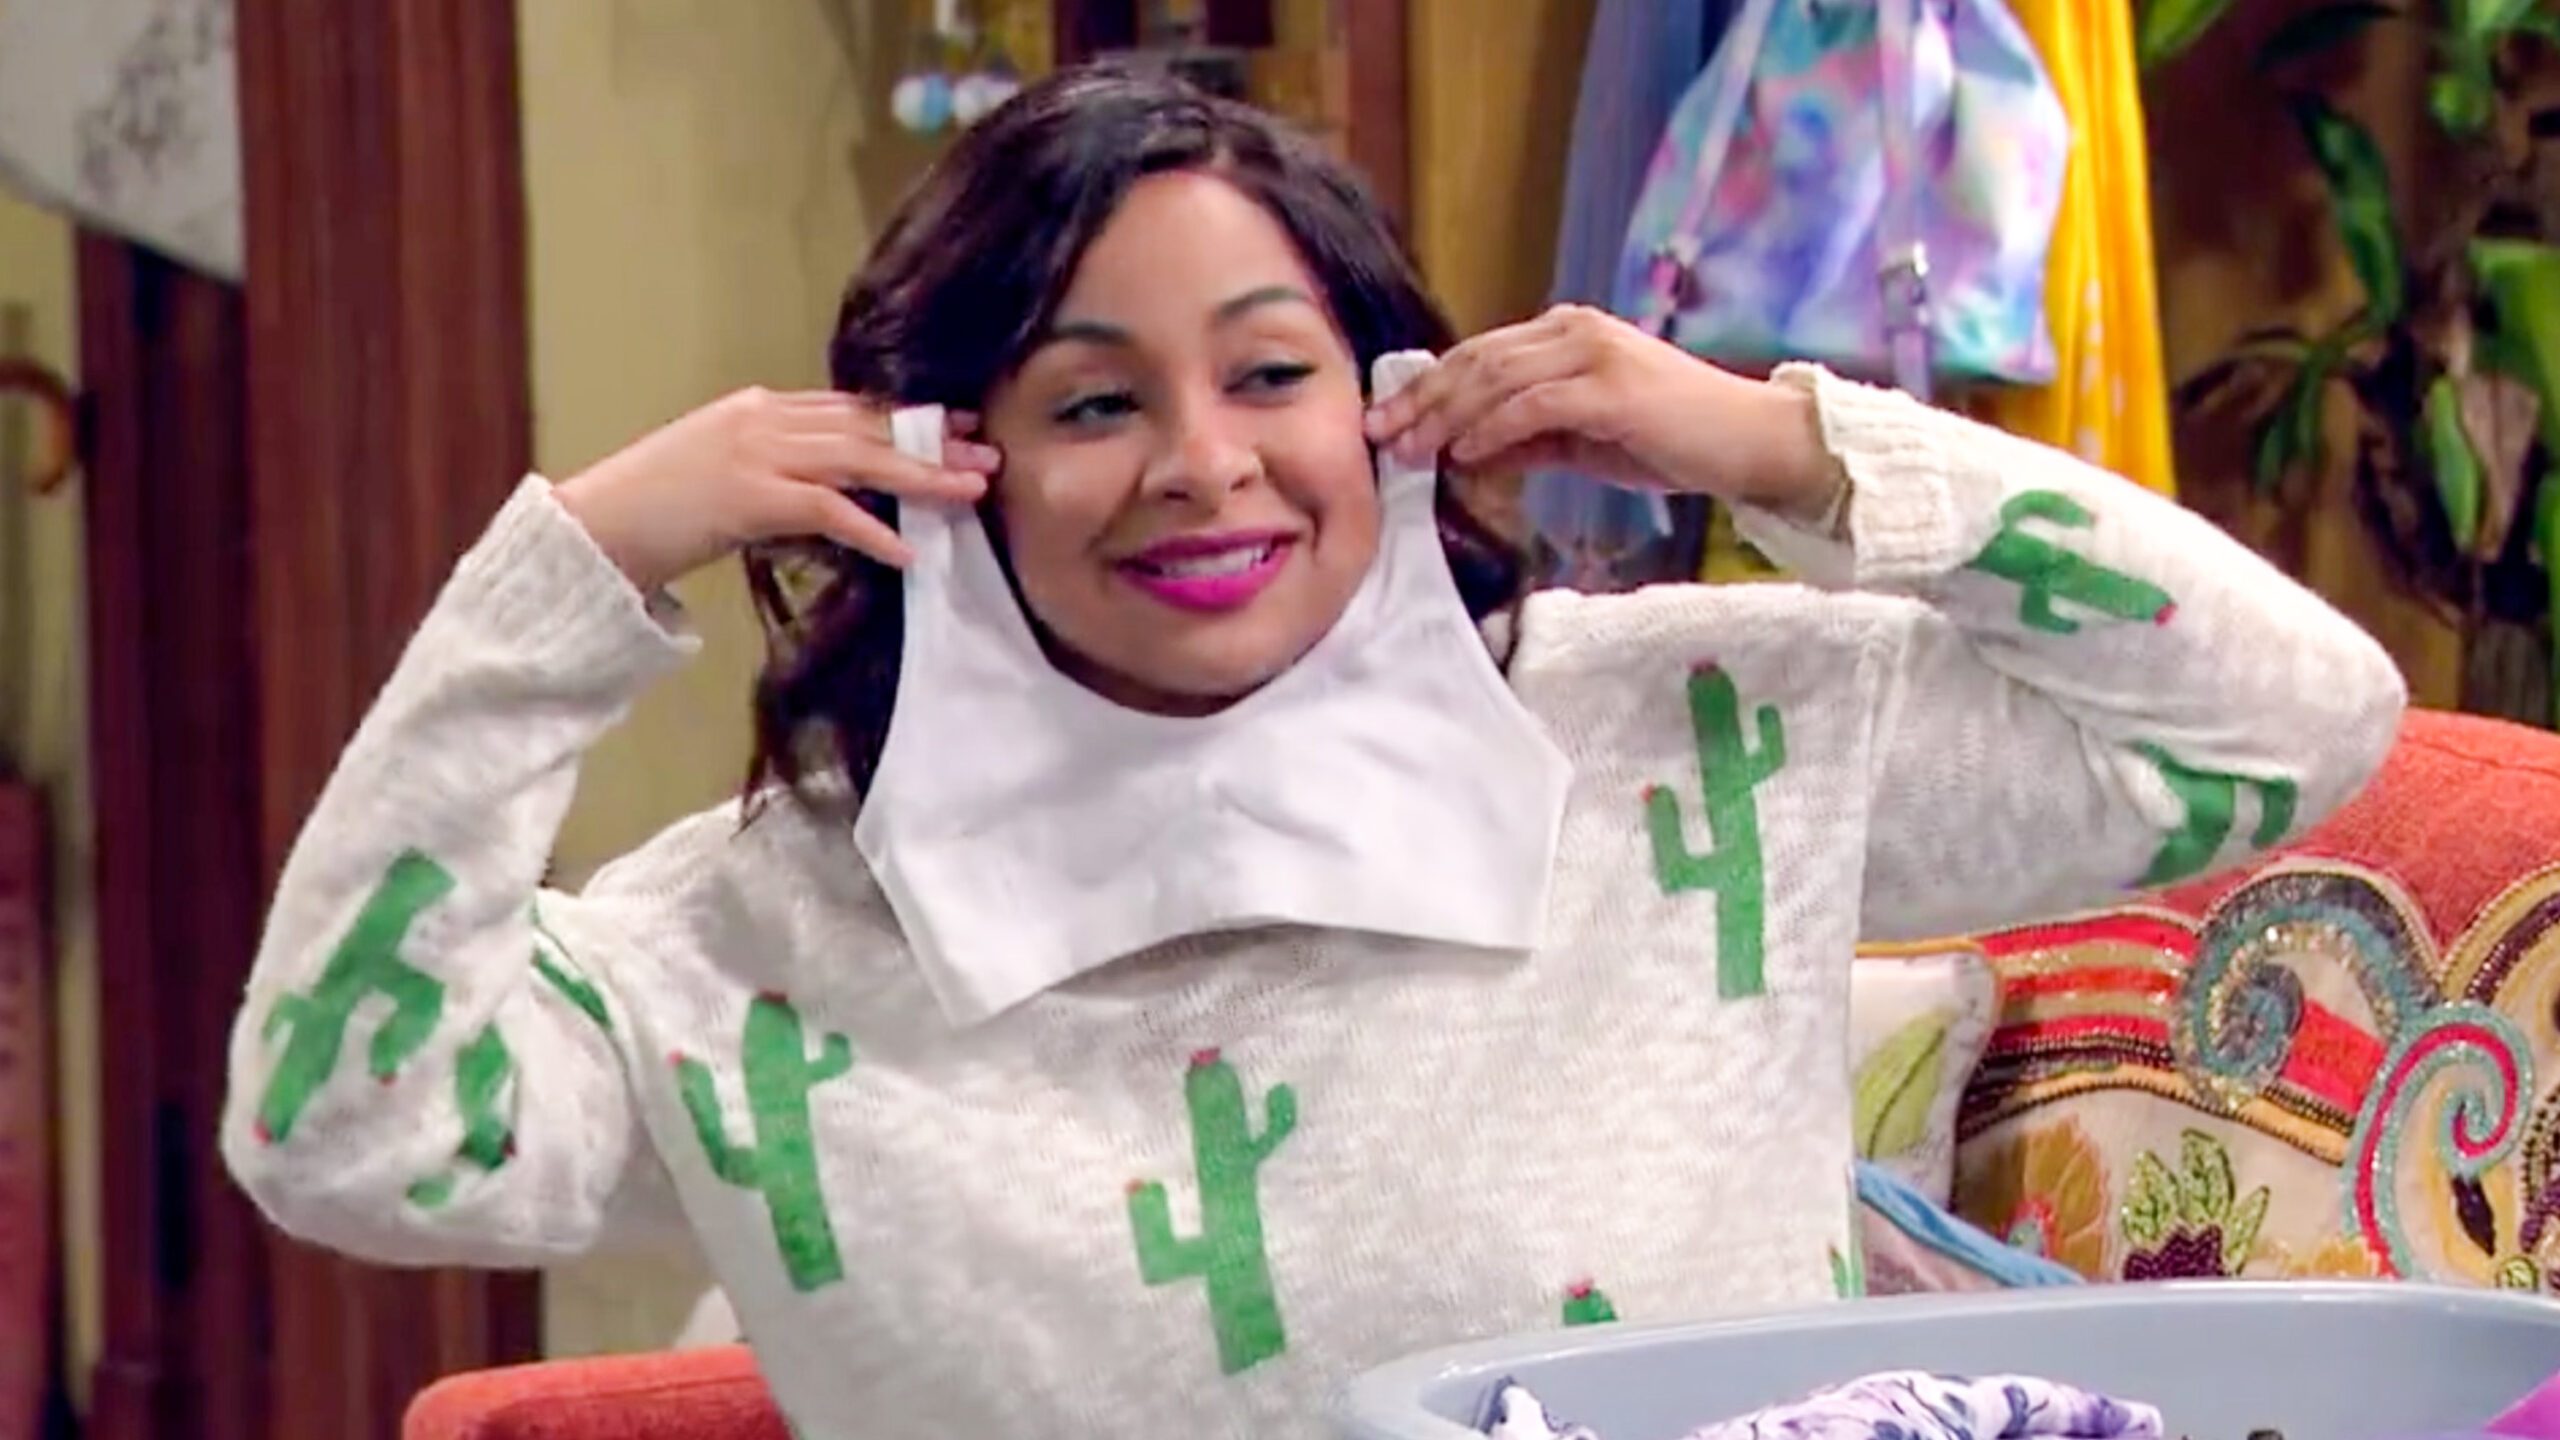 WATCH: First trailer for ‘That’s So Raven’ spinoff released